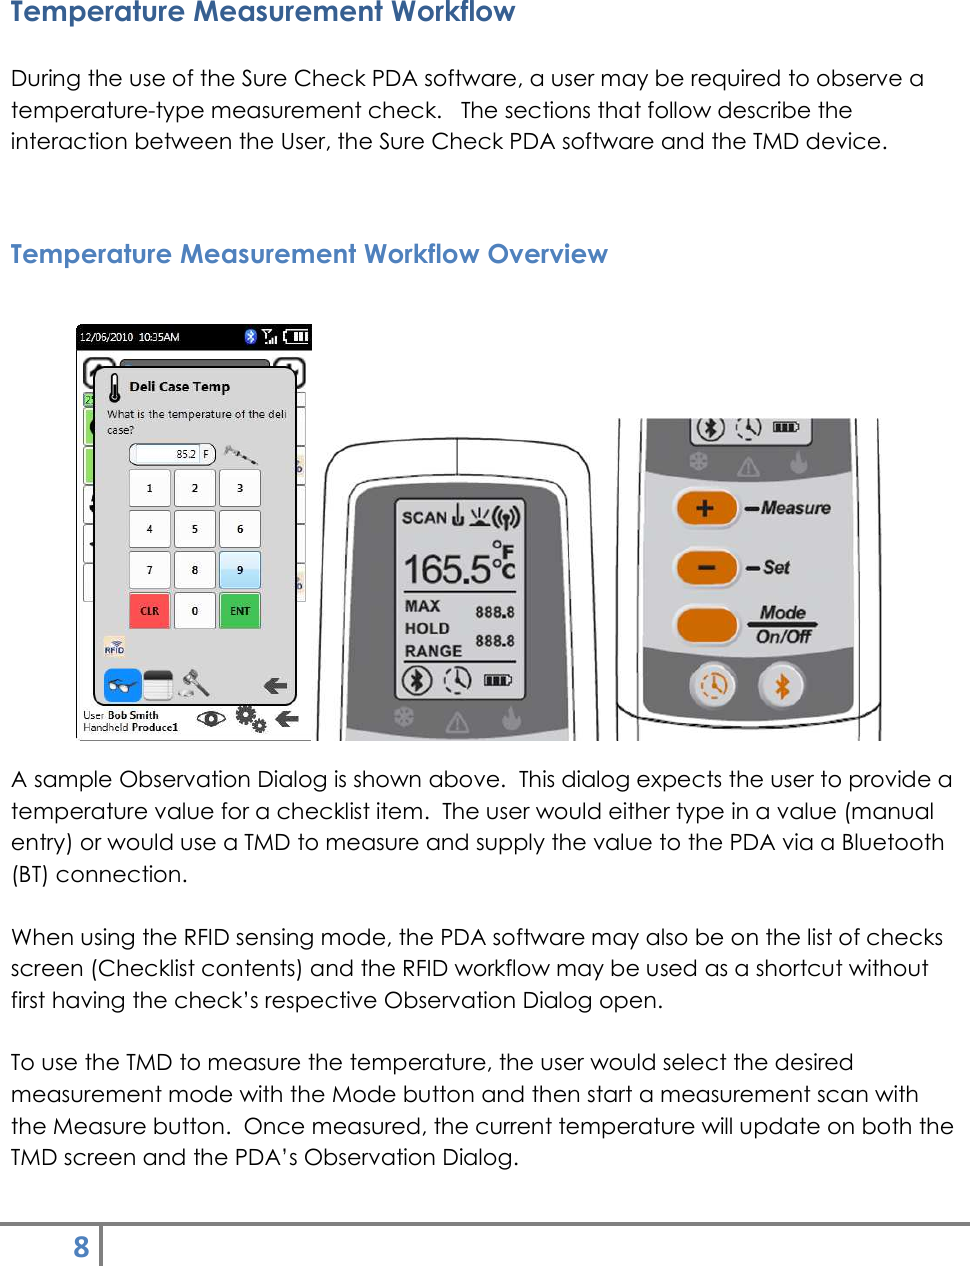 8    Temperature Measurement Workflow  During the use of the Sure Check PDA software, a user may be required to observe a temperature-type measurement check.   The sections that follow describe the interaction between the User, the Sure Check PDA software and the TMD device.  Temperature Measurement Workflow Overview   A sample Observation Dialog is shown above.  This dialog expects the user to provide a temperature value for a checklist item.  The user would either type in a value (manual entry) or would use a TMD to measure and supply the value to the PDA via a Bluetooth (BT) connection.  When using the RFID sensing mode, the PDA software may also be on the list of checks screen (Checklist contents) and the RFID workflow may be used as a shortcut without first having the check’s respective Observation Dialog open.  To use the TMD to measure the temperature, the user would select the desired measurement mode with the Mode button and then start a measurement scan with the Measure button.  Once measured, the current temperature will update on both the TMD screen and the PDA’s Observation Dialog.  